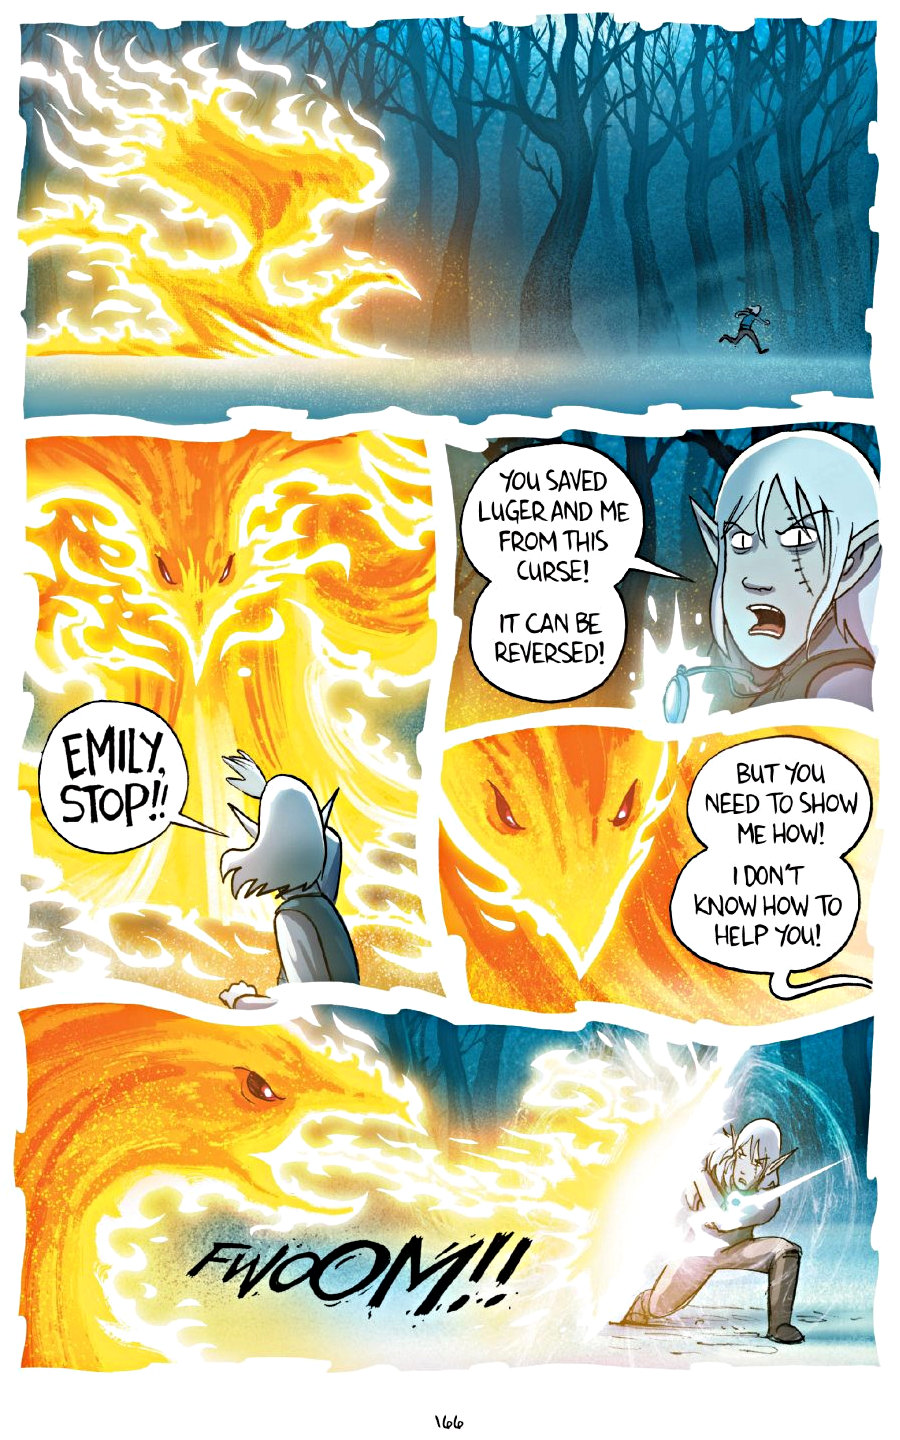 page 166 of amulet 7 firelight graphic novel